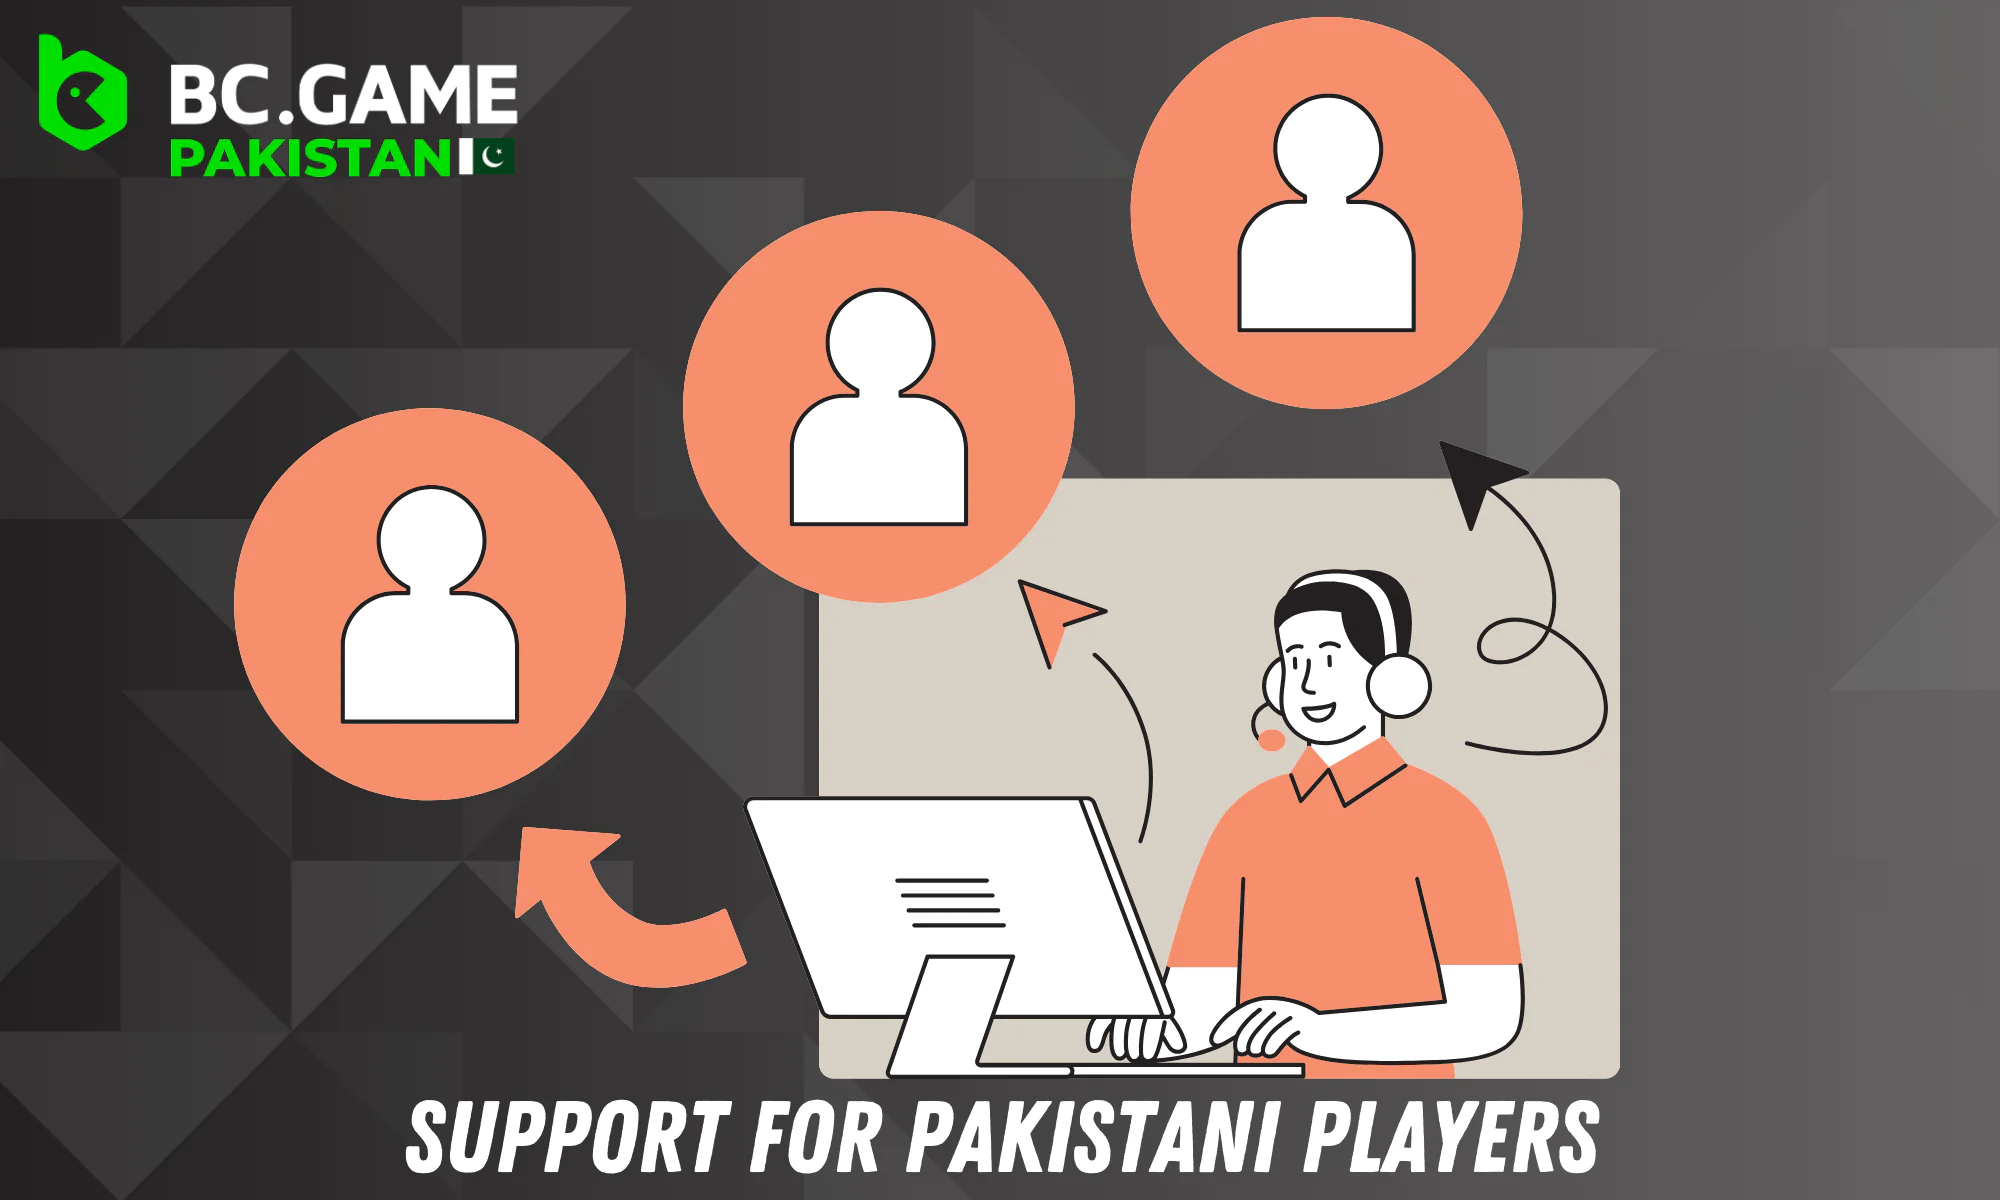 BC Game offers comprehensive support for players from Pakistan 24/7